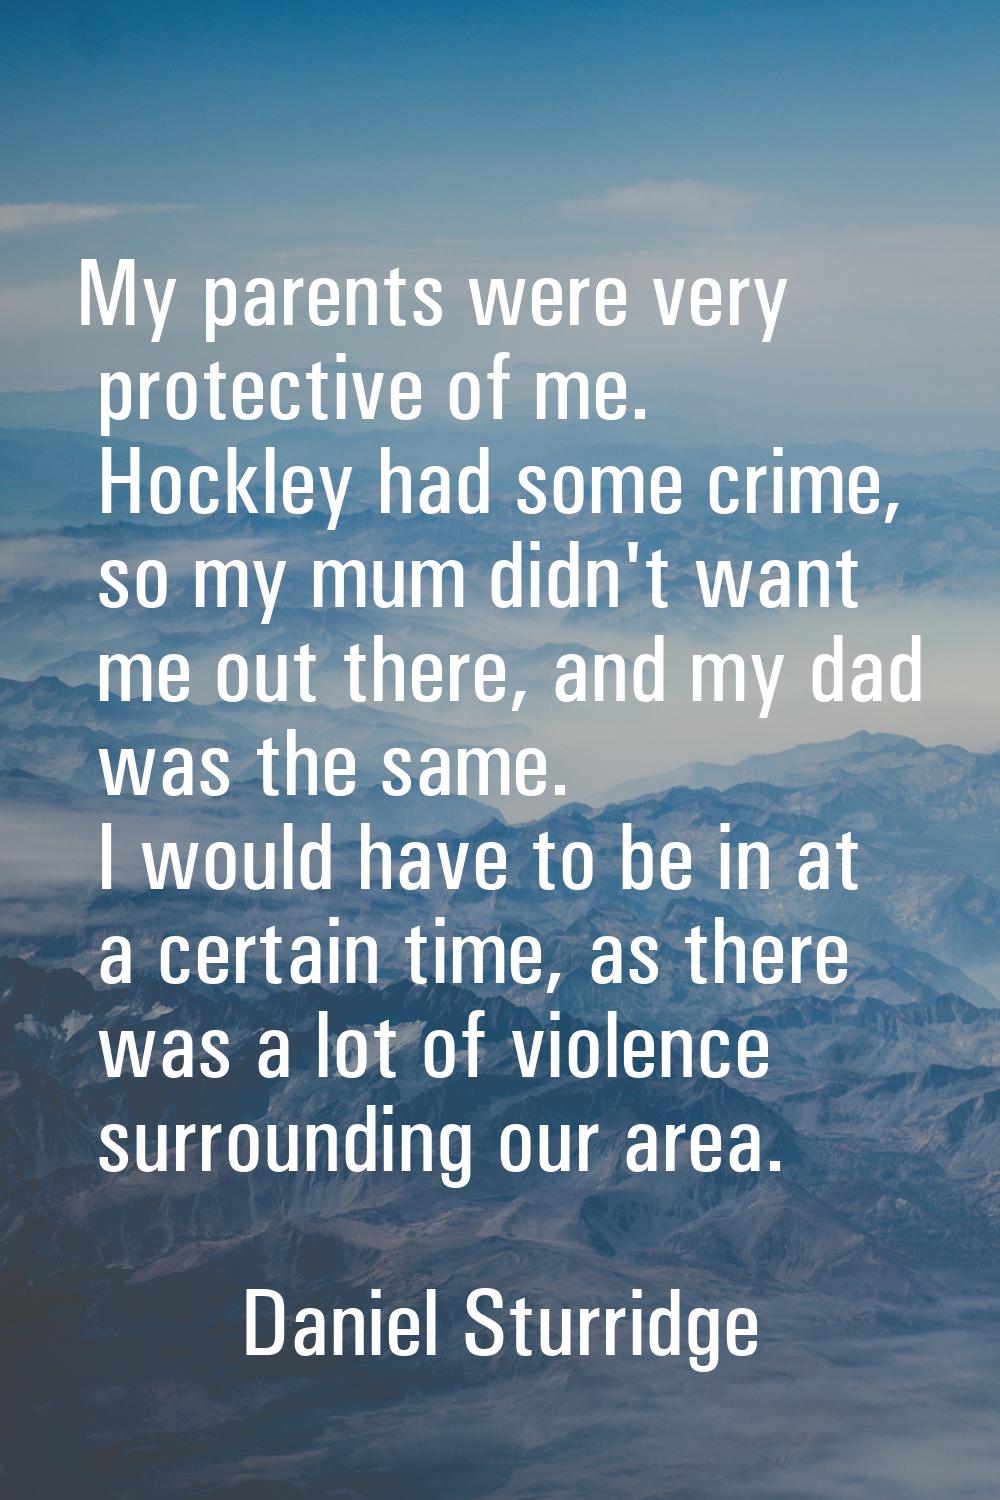 My parents were very protective of me. Hockley had some crime, so my mum didn't want me out there, 